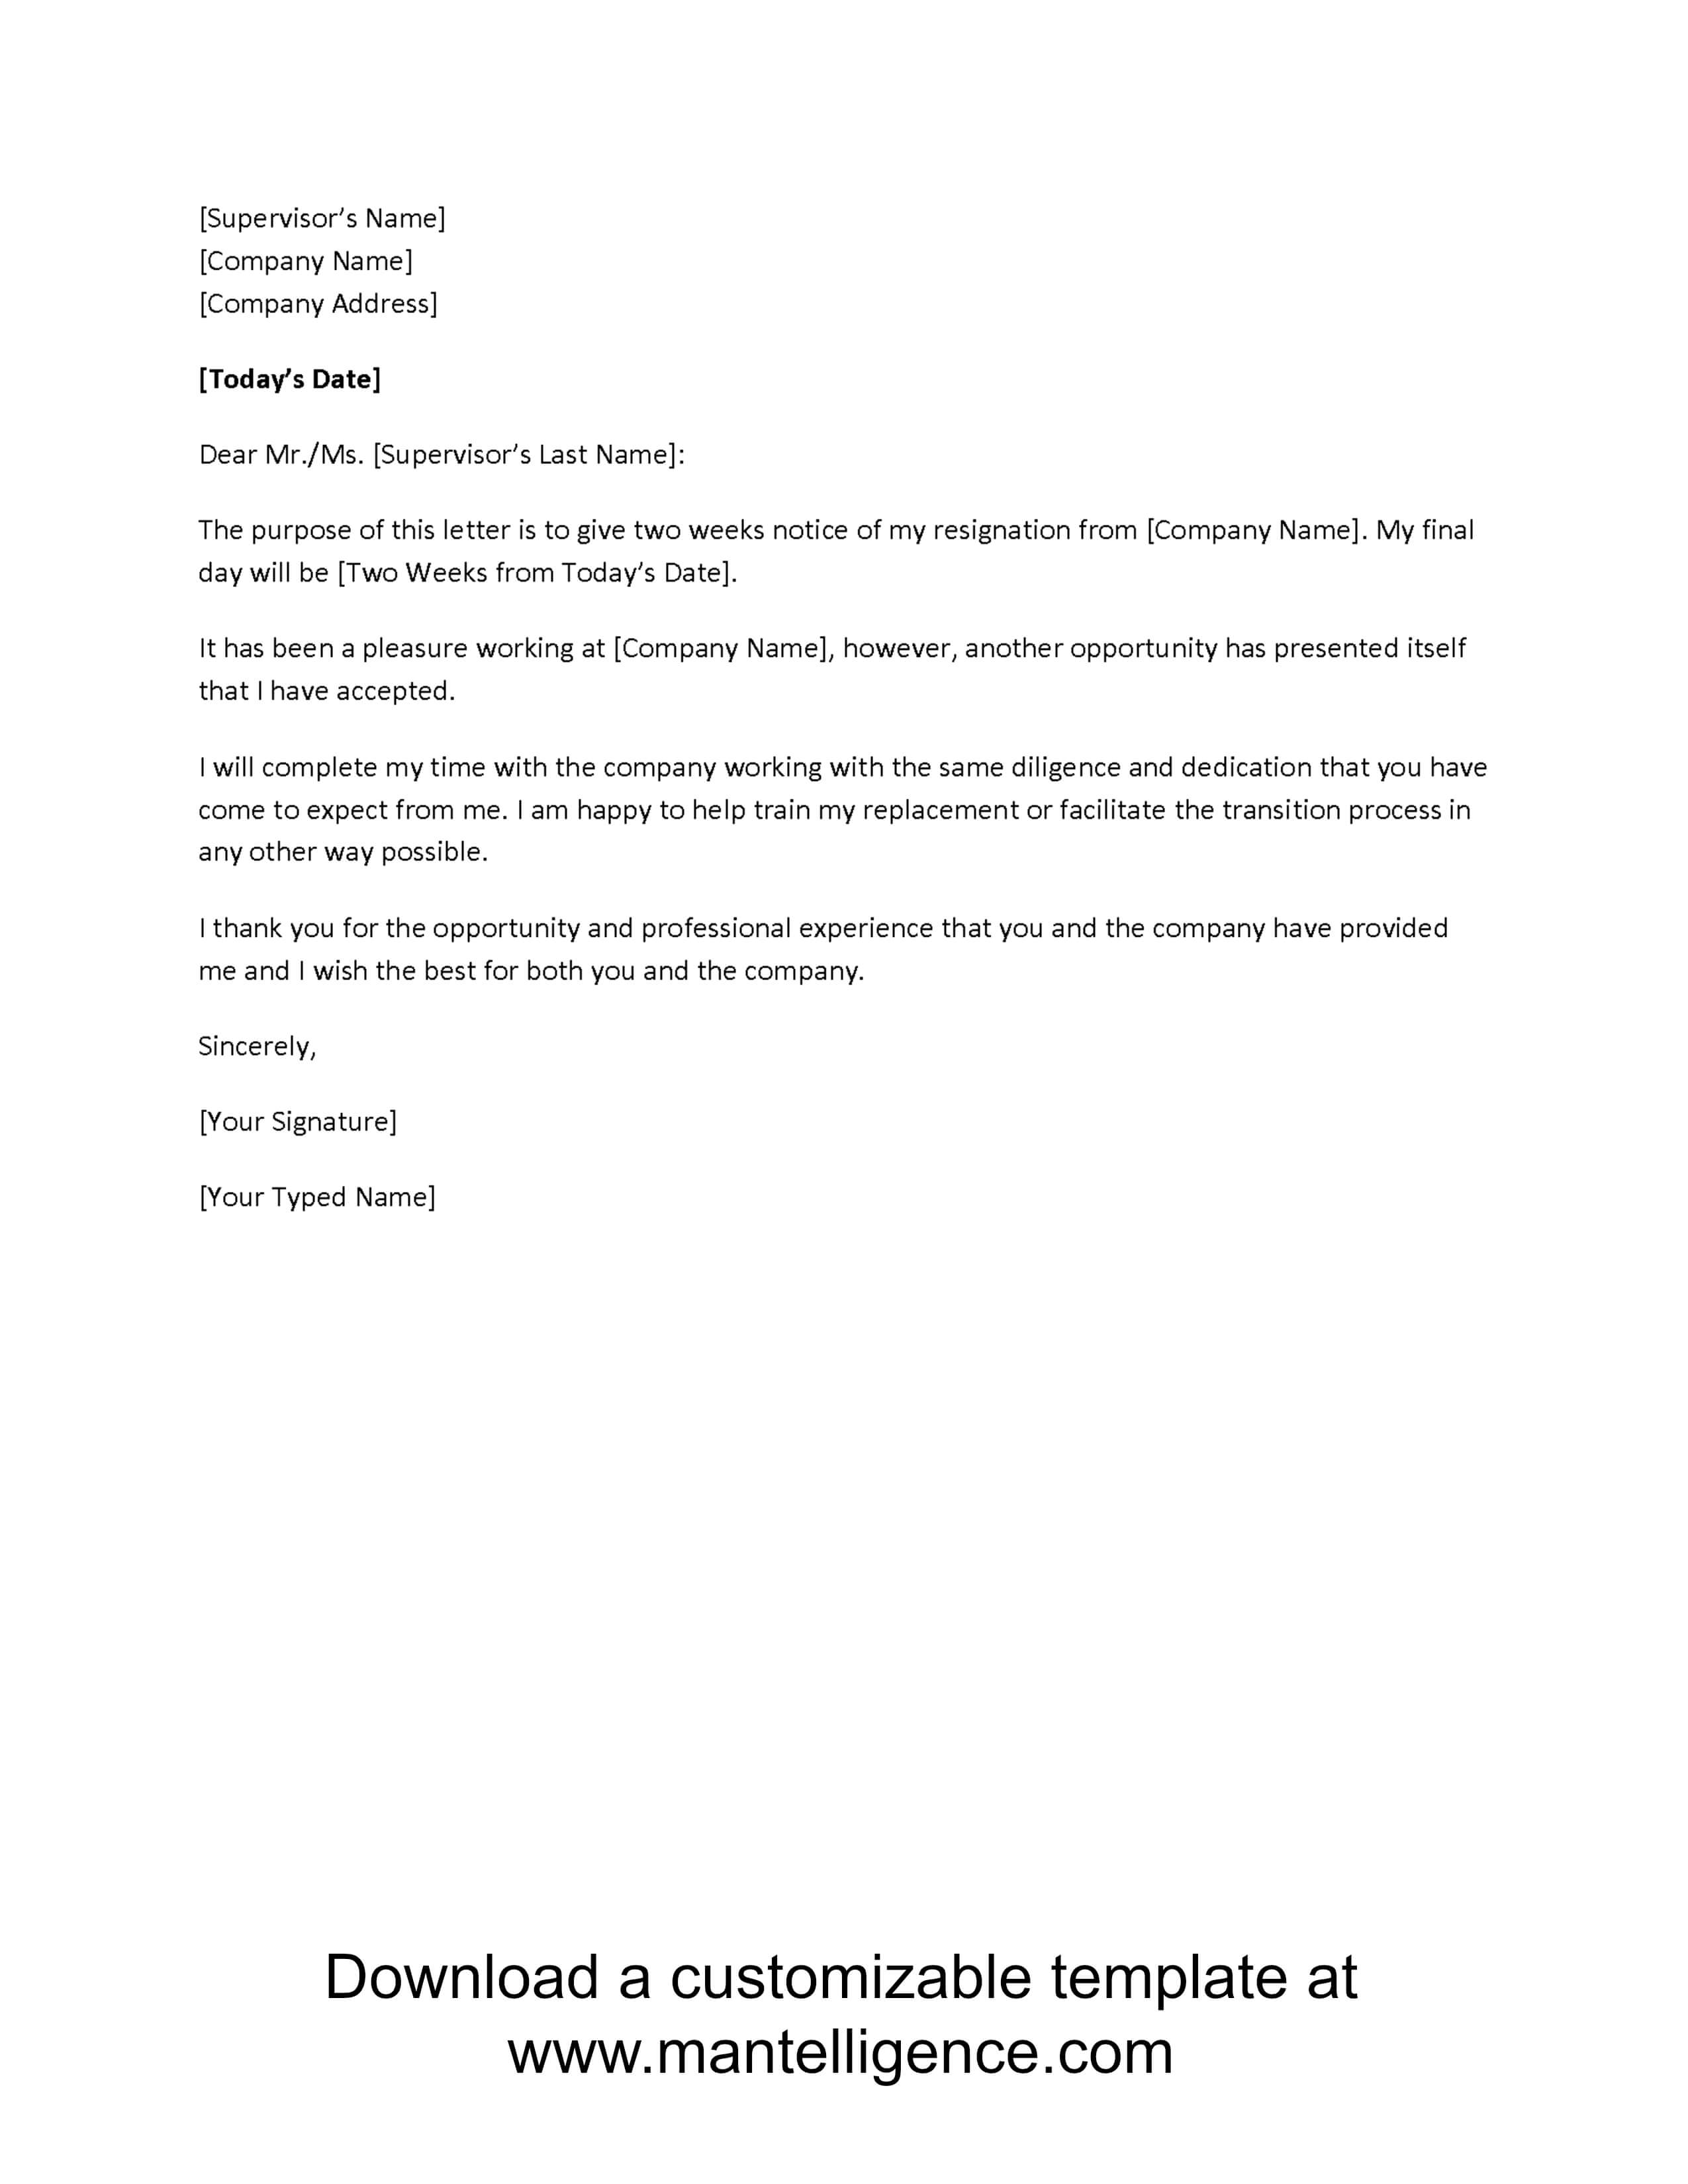 3 Highly Professional Two Weeks Notice Letter Templates For Two Week Notice Template Word